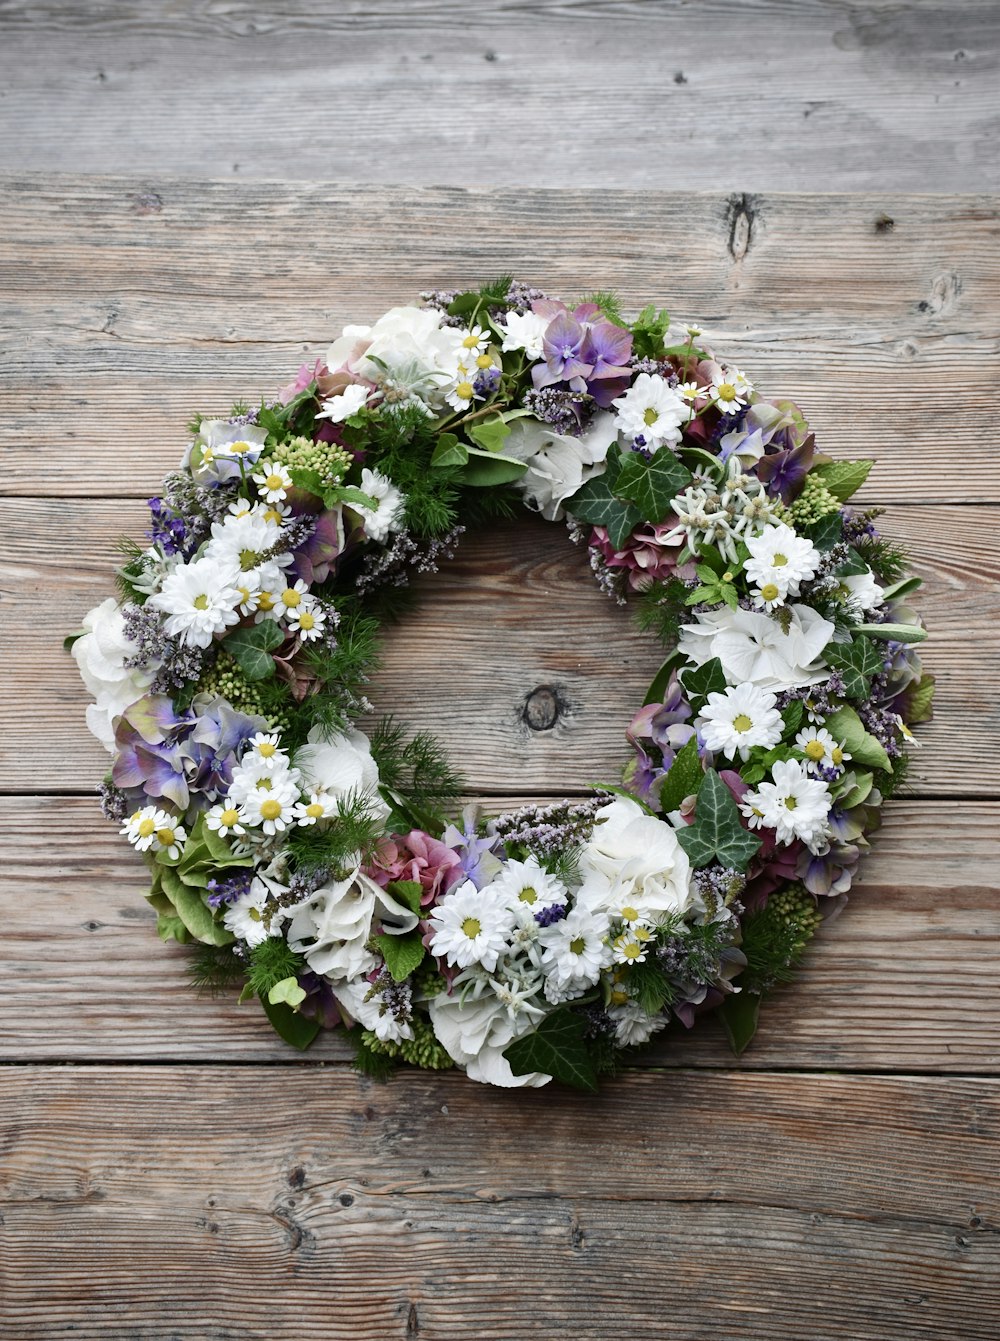 Flower Wreath Pictures | Download Free Images on Unsplash